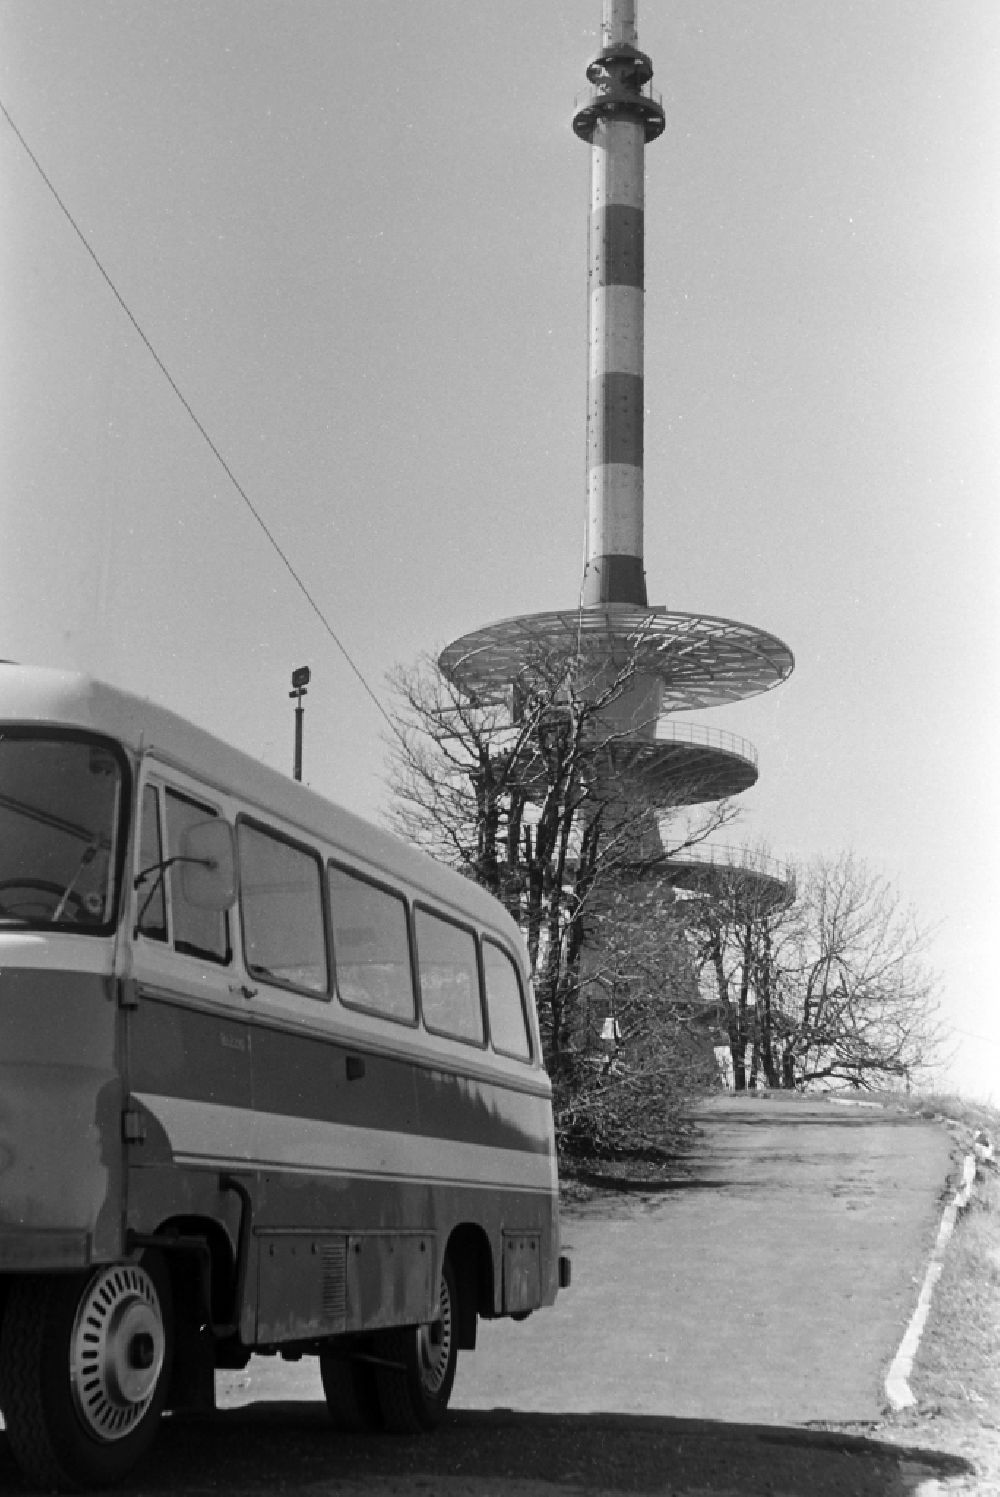 Brotterode: Television Tower Grosser Inselsberg in Brotterode, Thuringia on the territory of the former GDR, German Democratic Republic